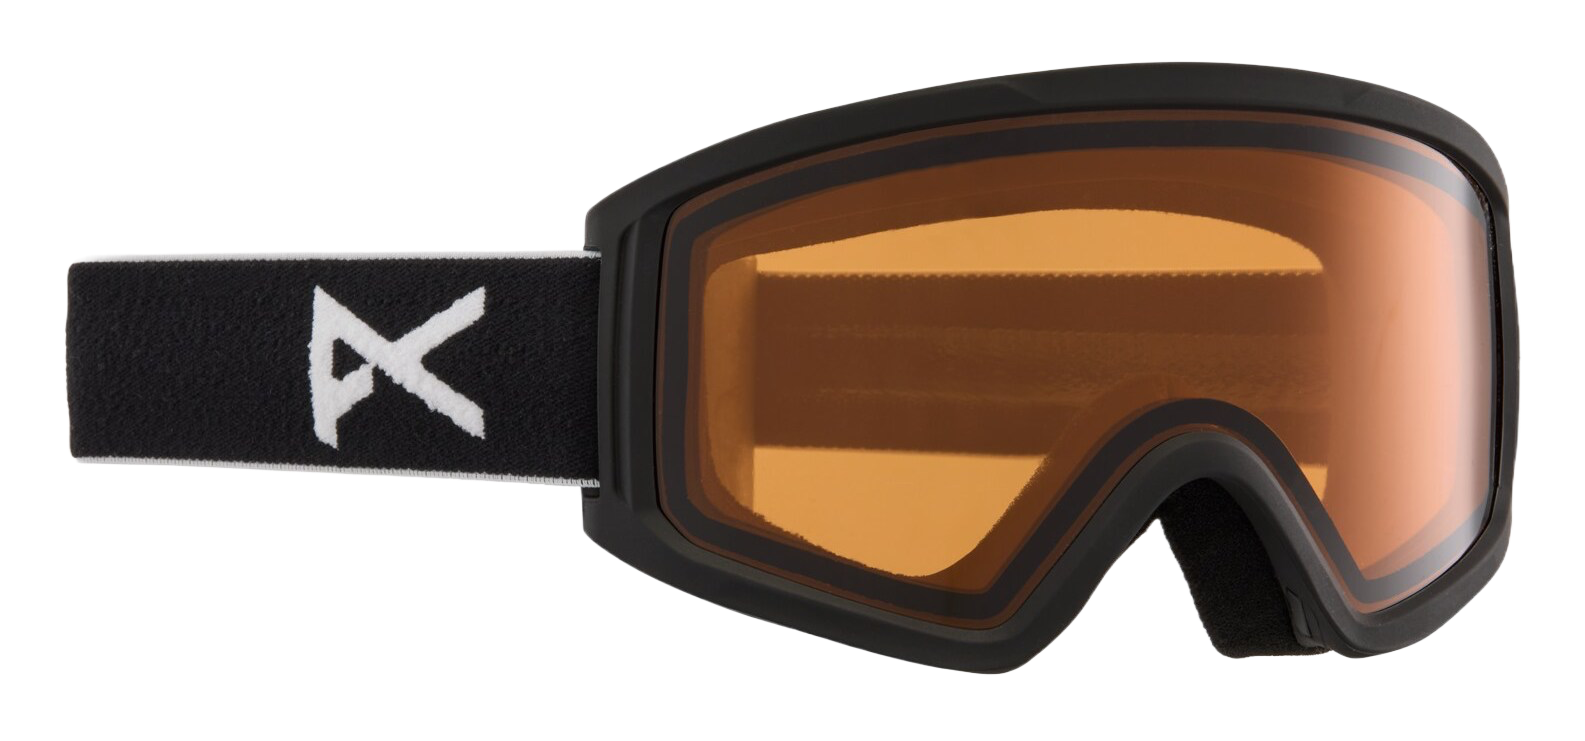 Anon Tracker 2.0 kids' goggles - Black with Amber lens